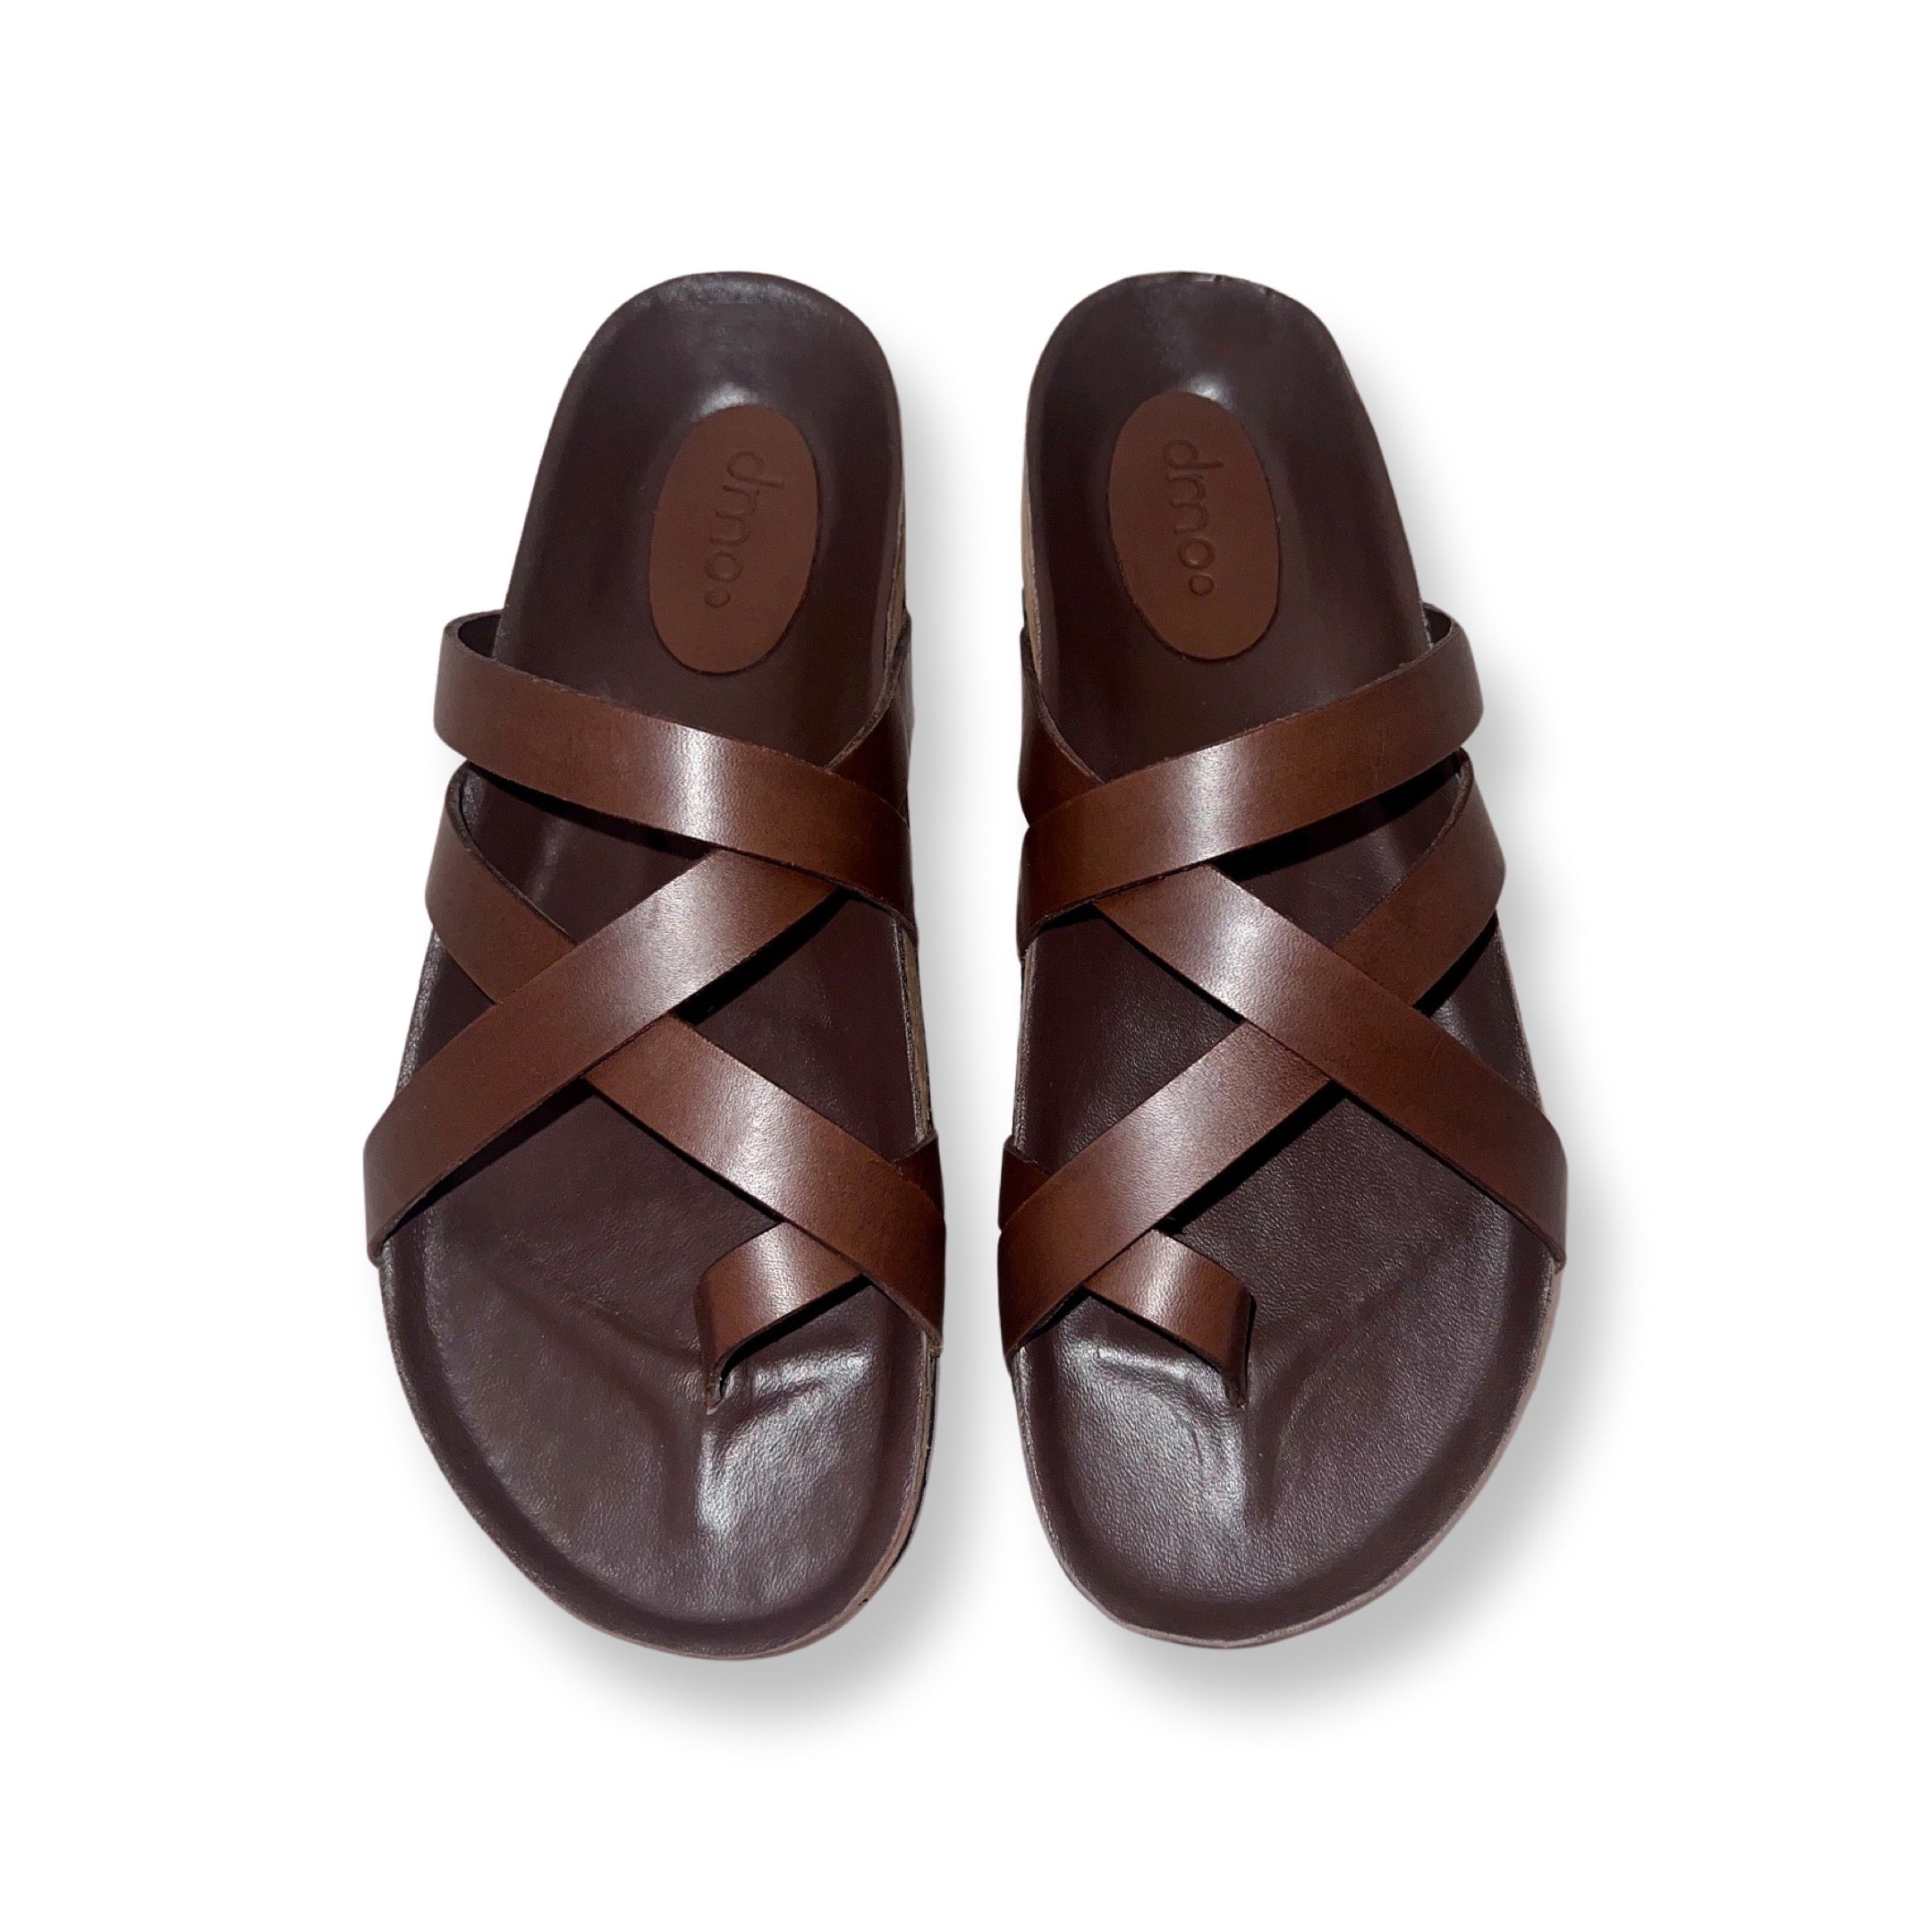 Close-up view of Pelle Corko Espresso dark brown leather cork sandals by dmodot